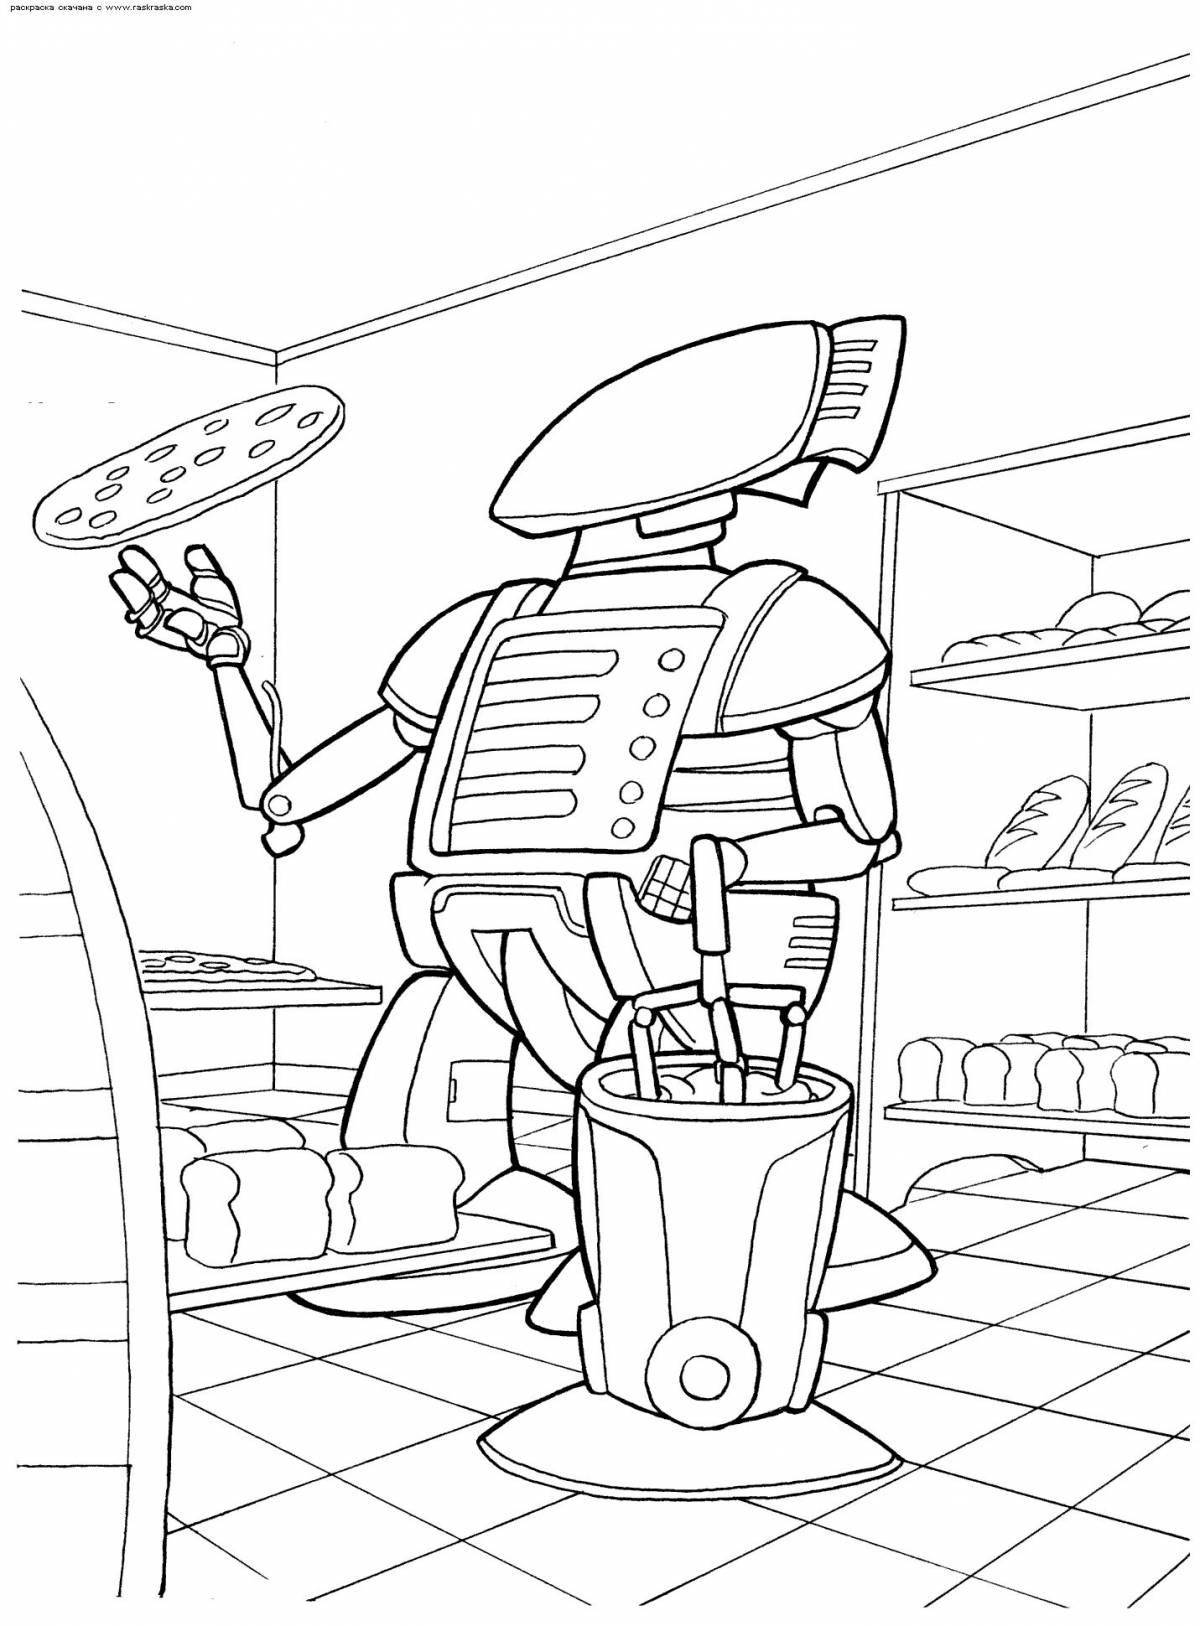 Innovative future coloring page